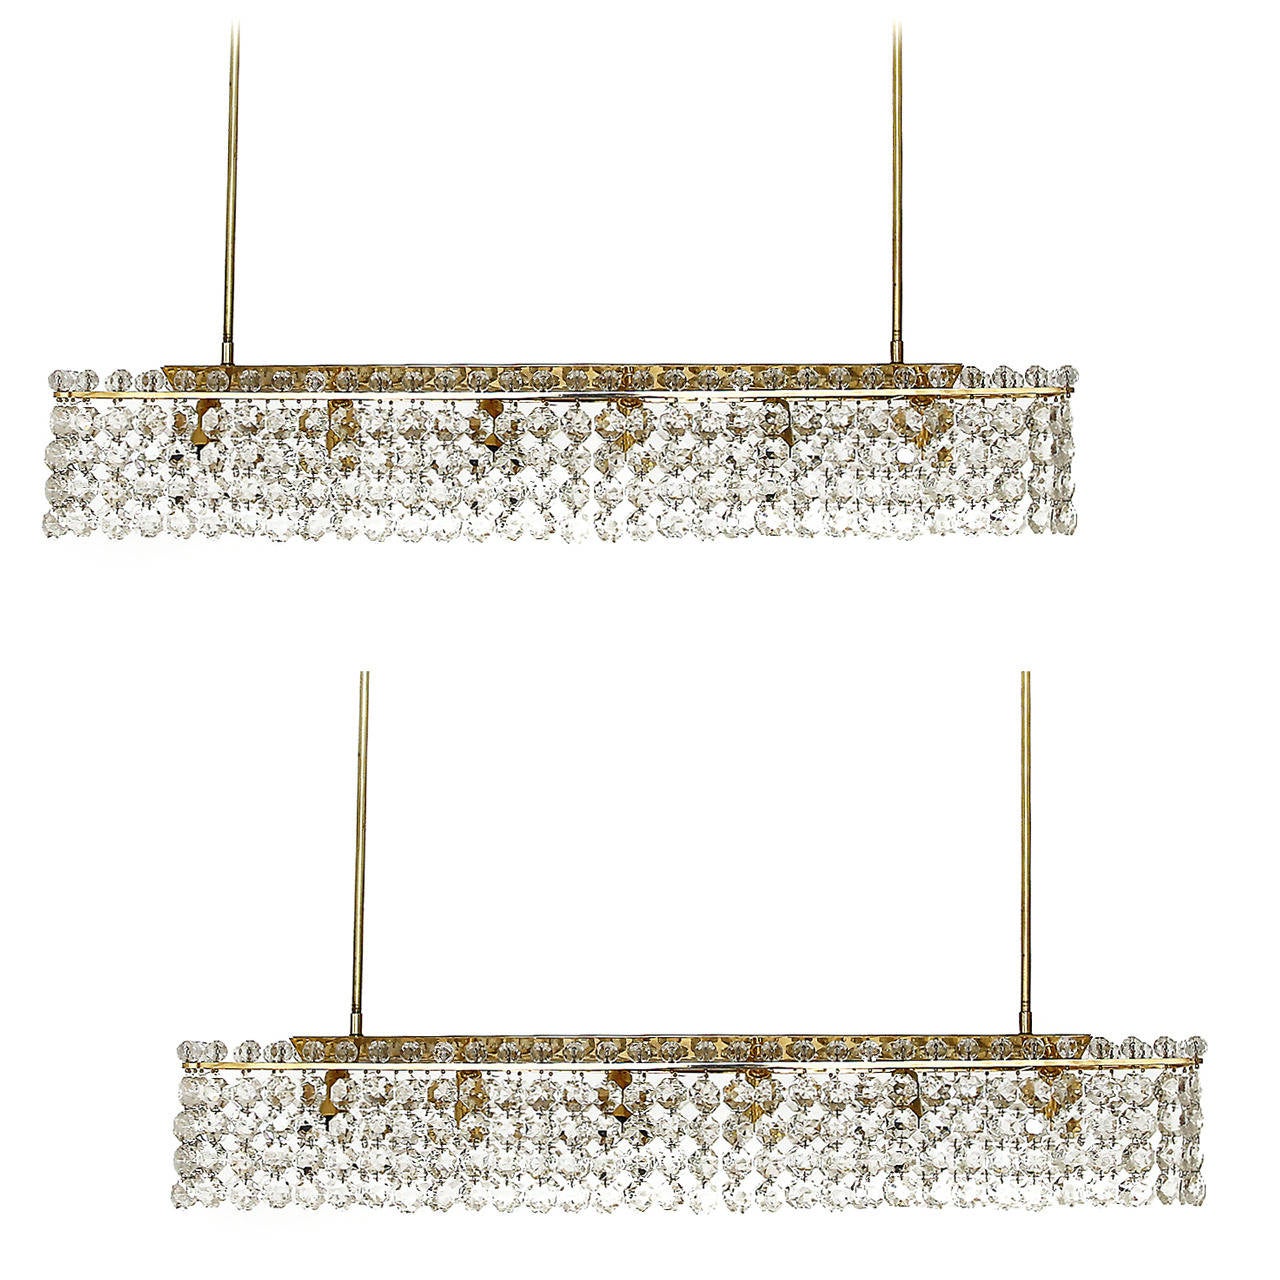 Two large and high quality chandeliers / pendants by Bakalowits & Soehne, Austria, Vienna, 1960's. These glamorous lights are made of box brass frames decorated with hangings of hand cut diamond shaped glass crystals. Large crystal glass pearls